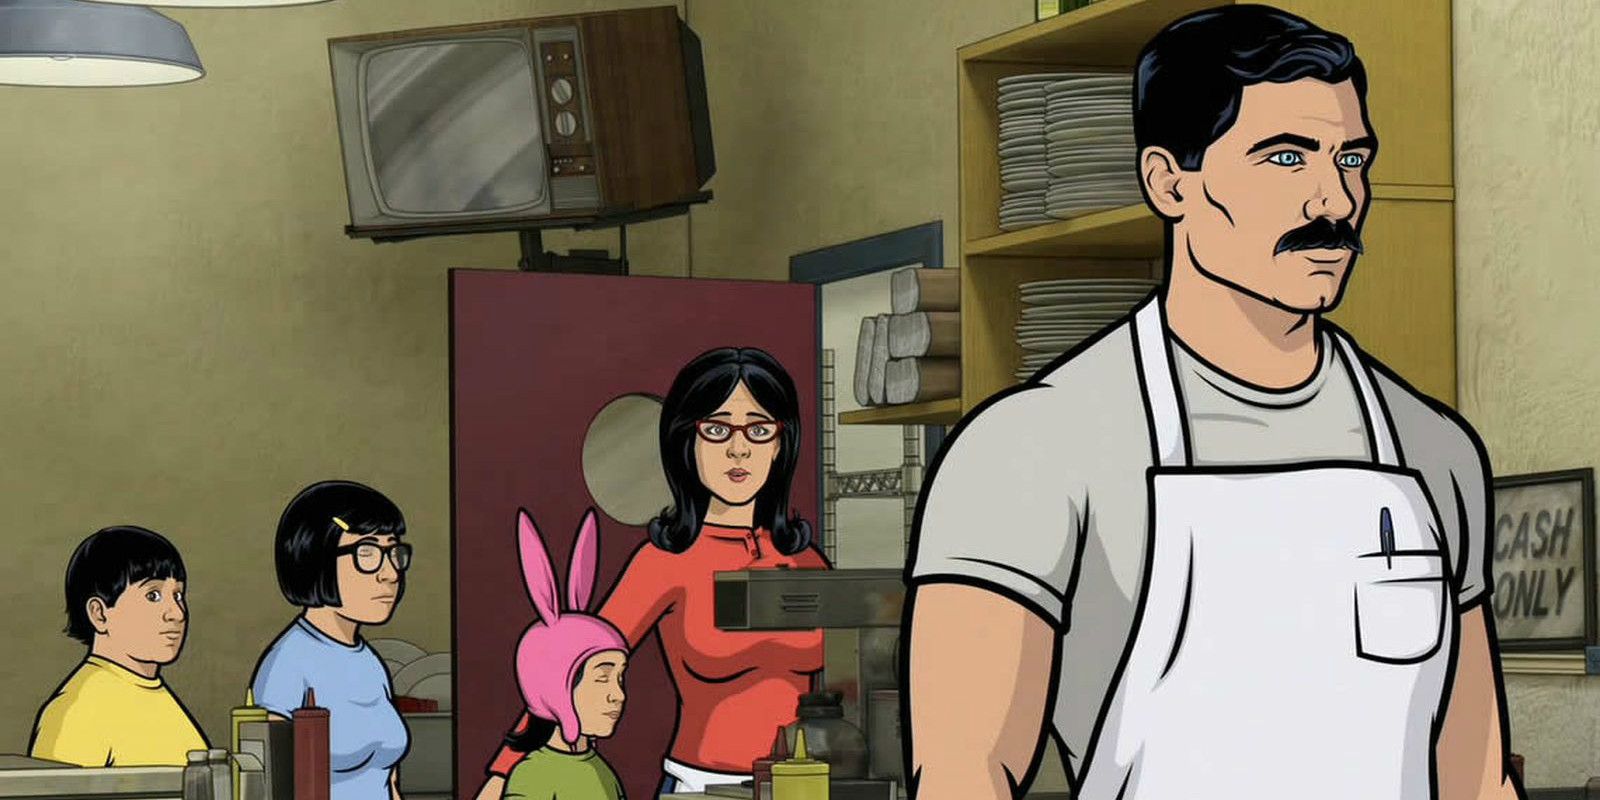 10 Wildest & Most Fascinating Bobs Burgers Fan Theories About The Show